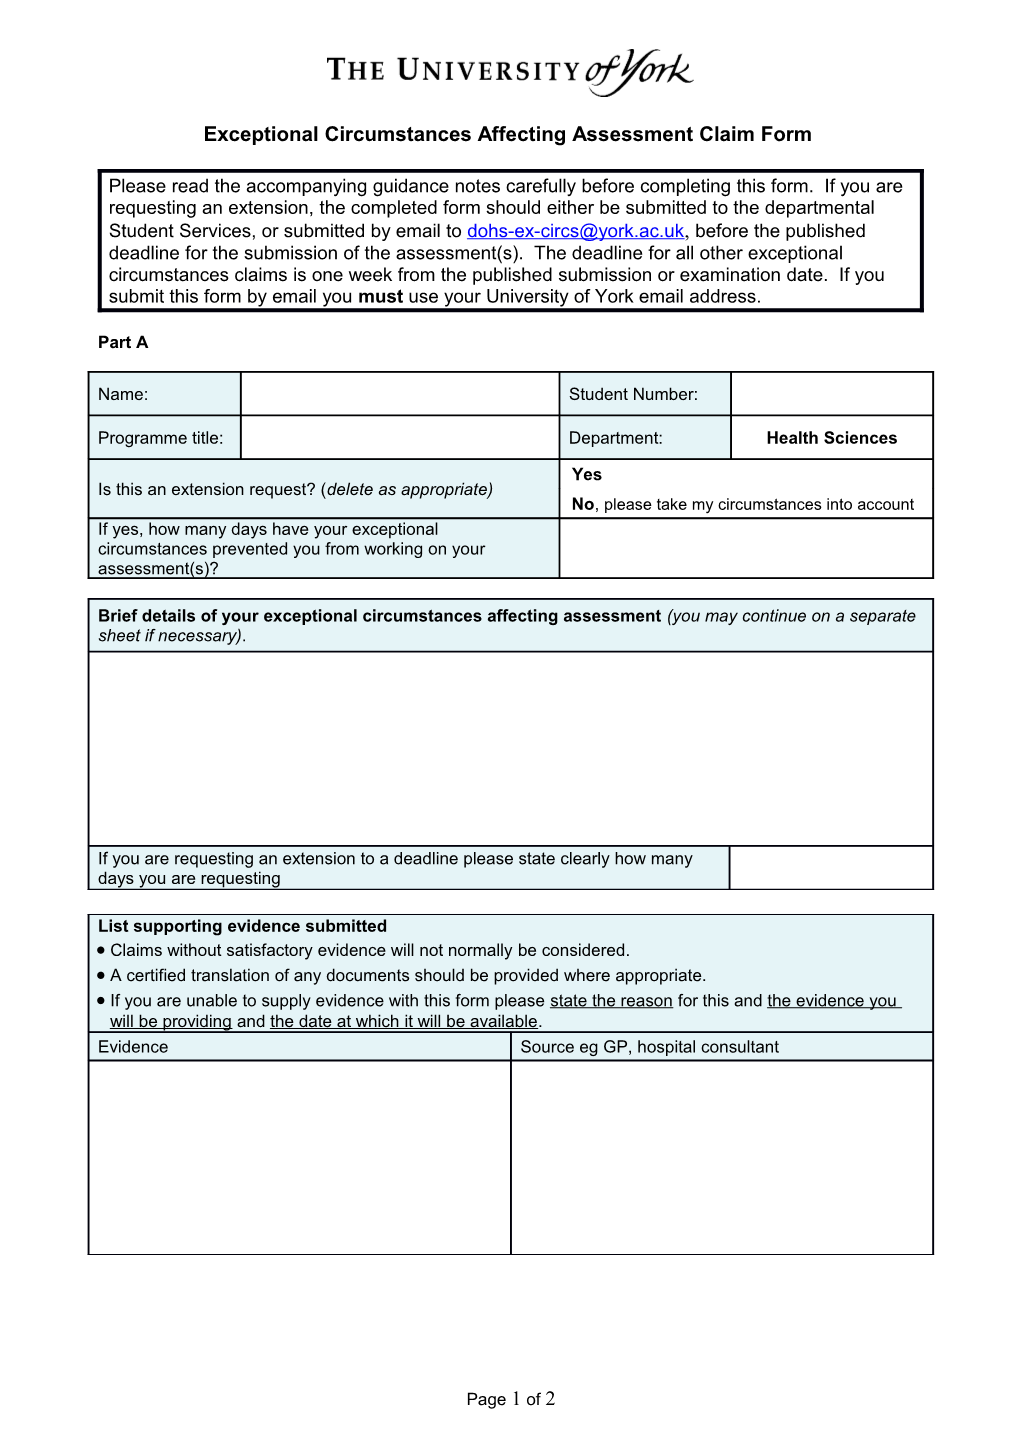 Exceptional Circumstances Affecting Assessment Claim Form